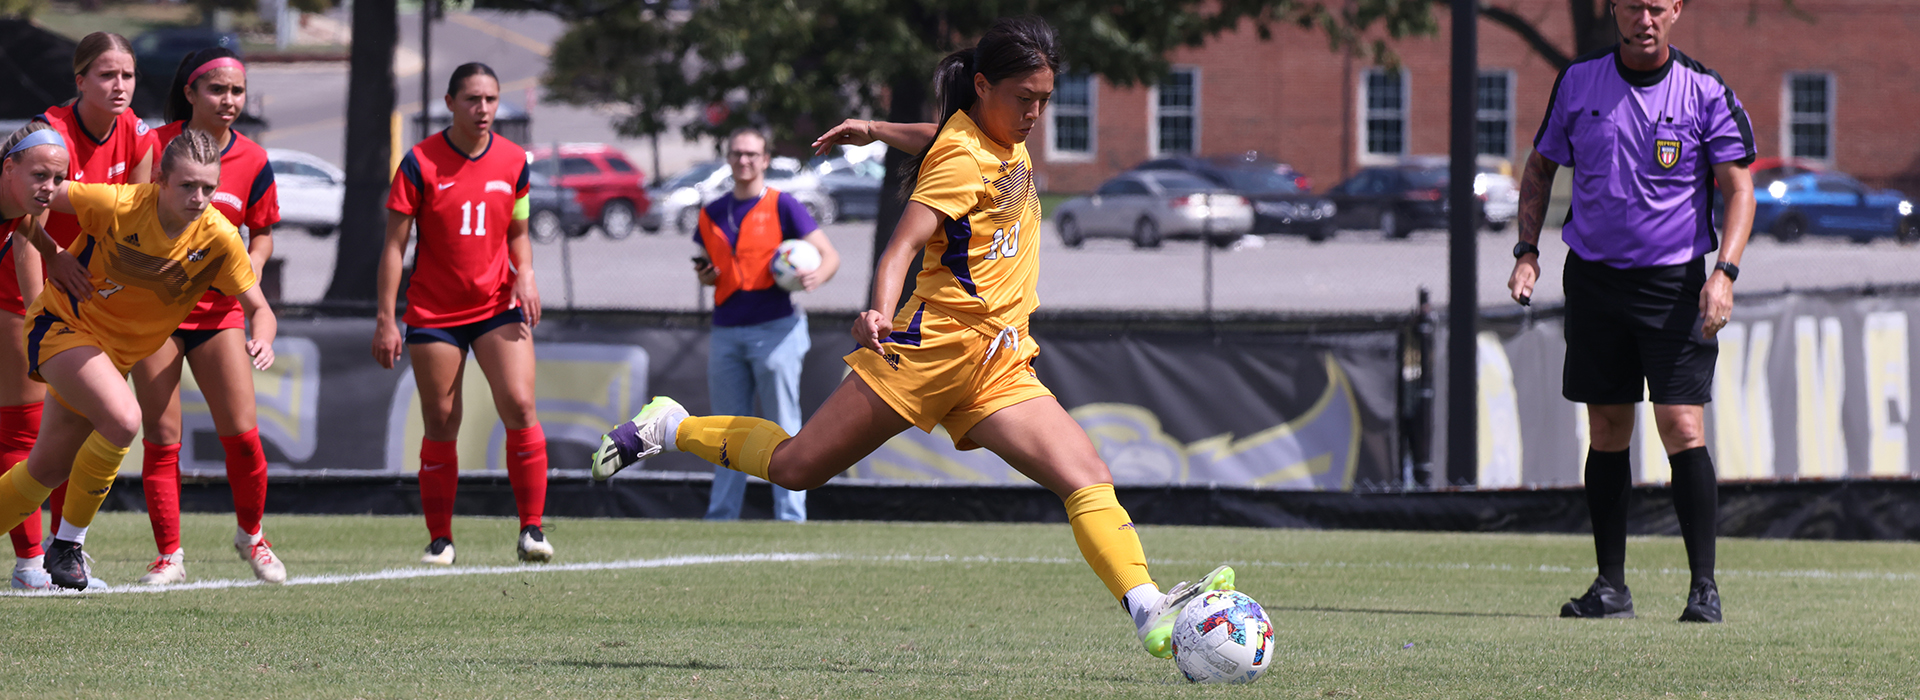 Golden Eagles tie school record for goals scored in 7-0 win over Southern Indiana